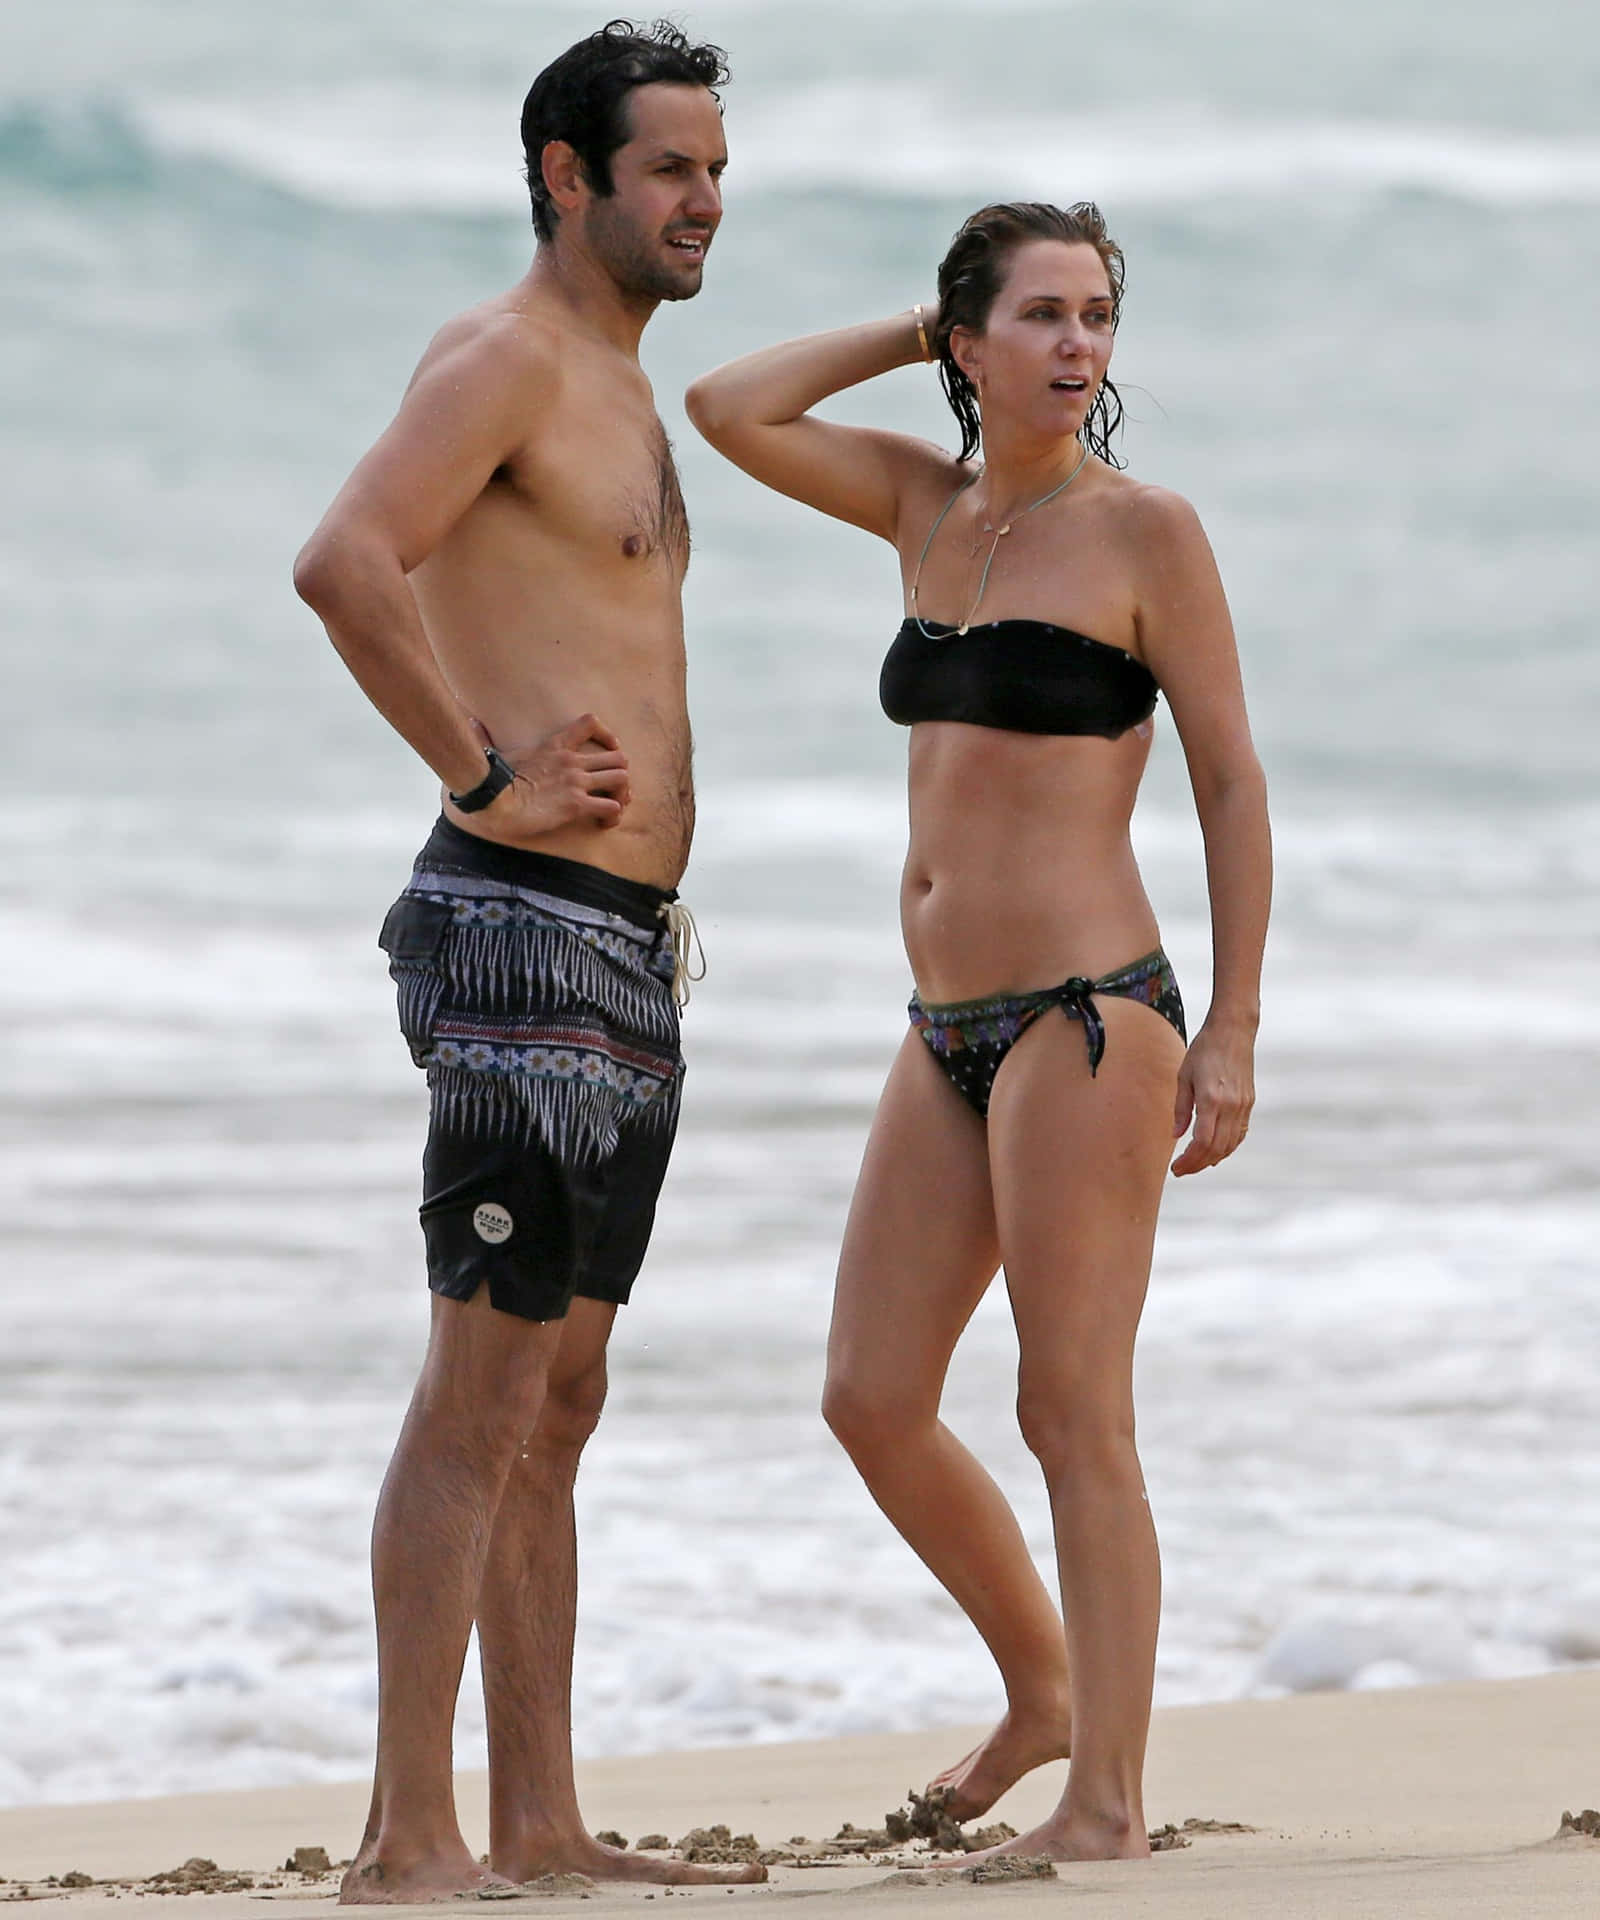 A Man And Woman Standing On A Beach